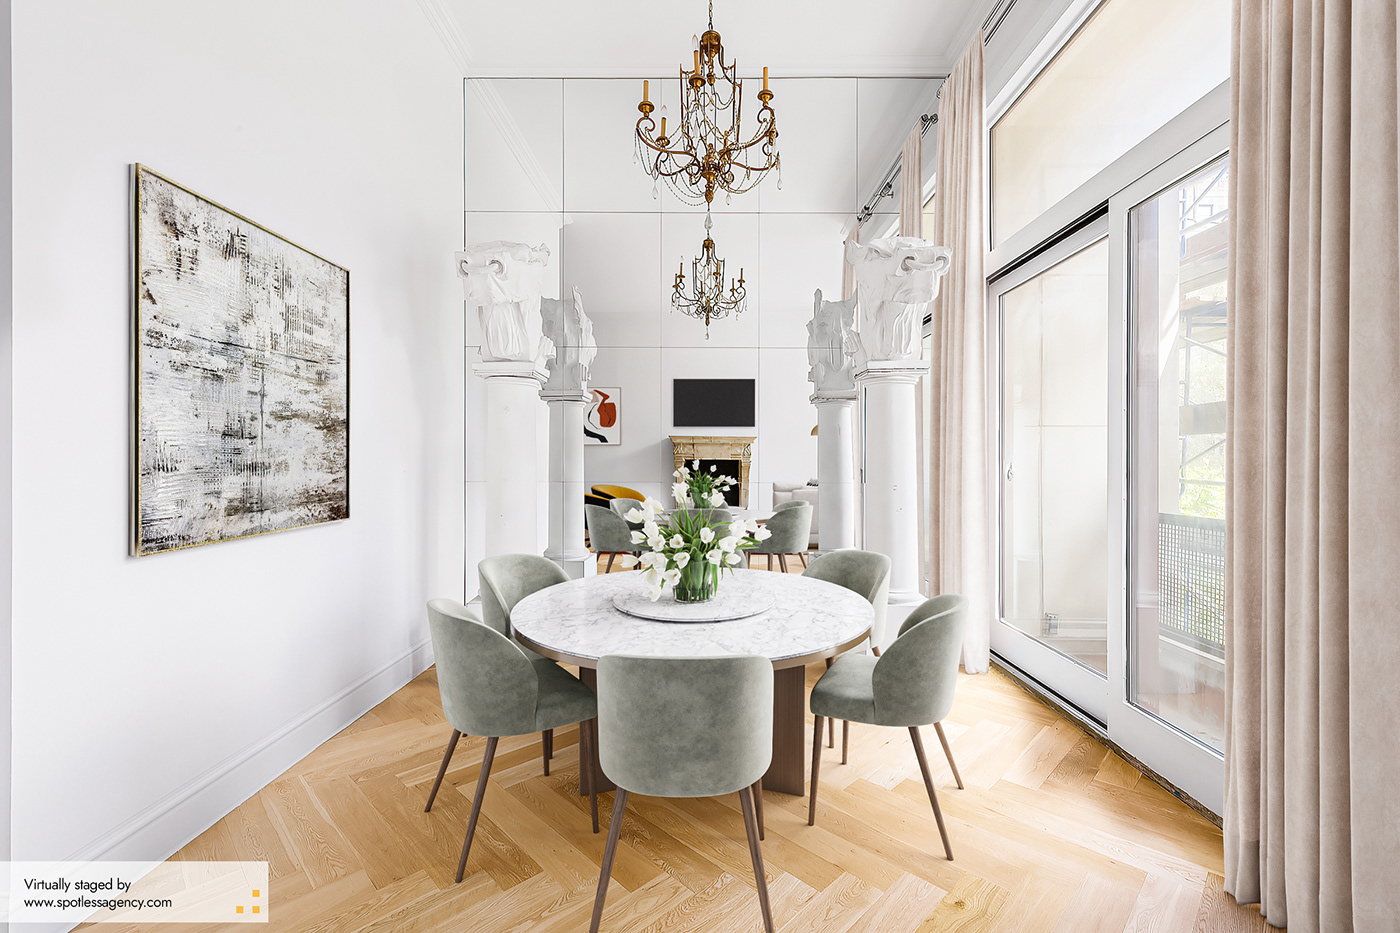 3D Rendering 3ds max interior design  New York Photography  Render spotlessagency visualization